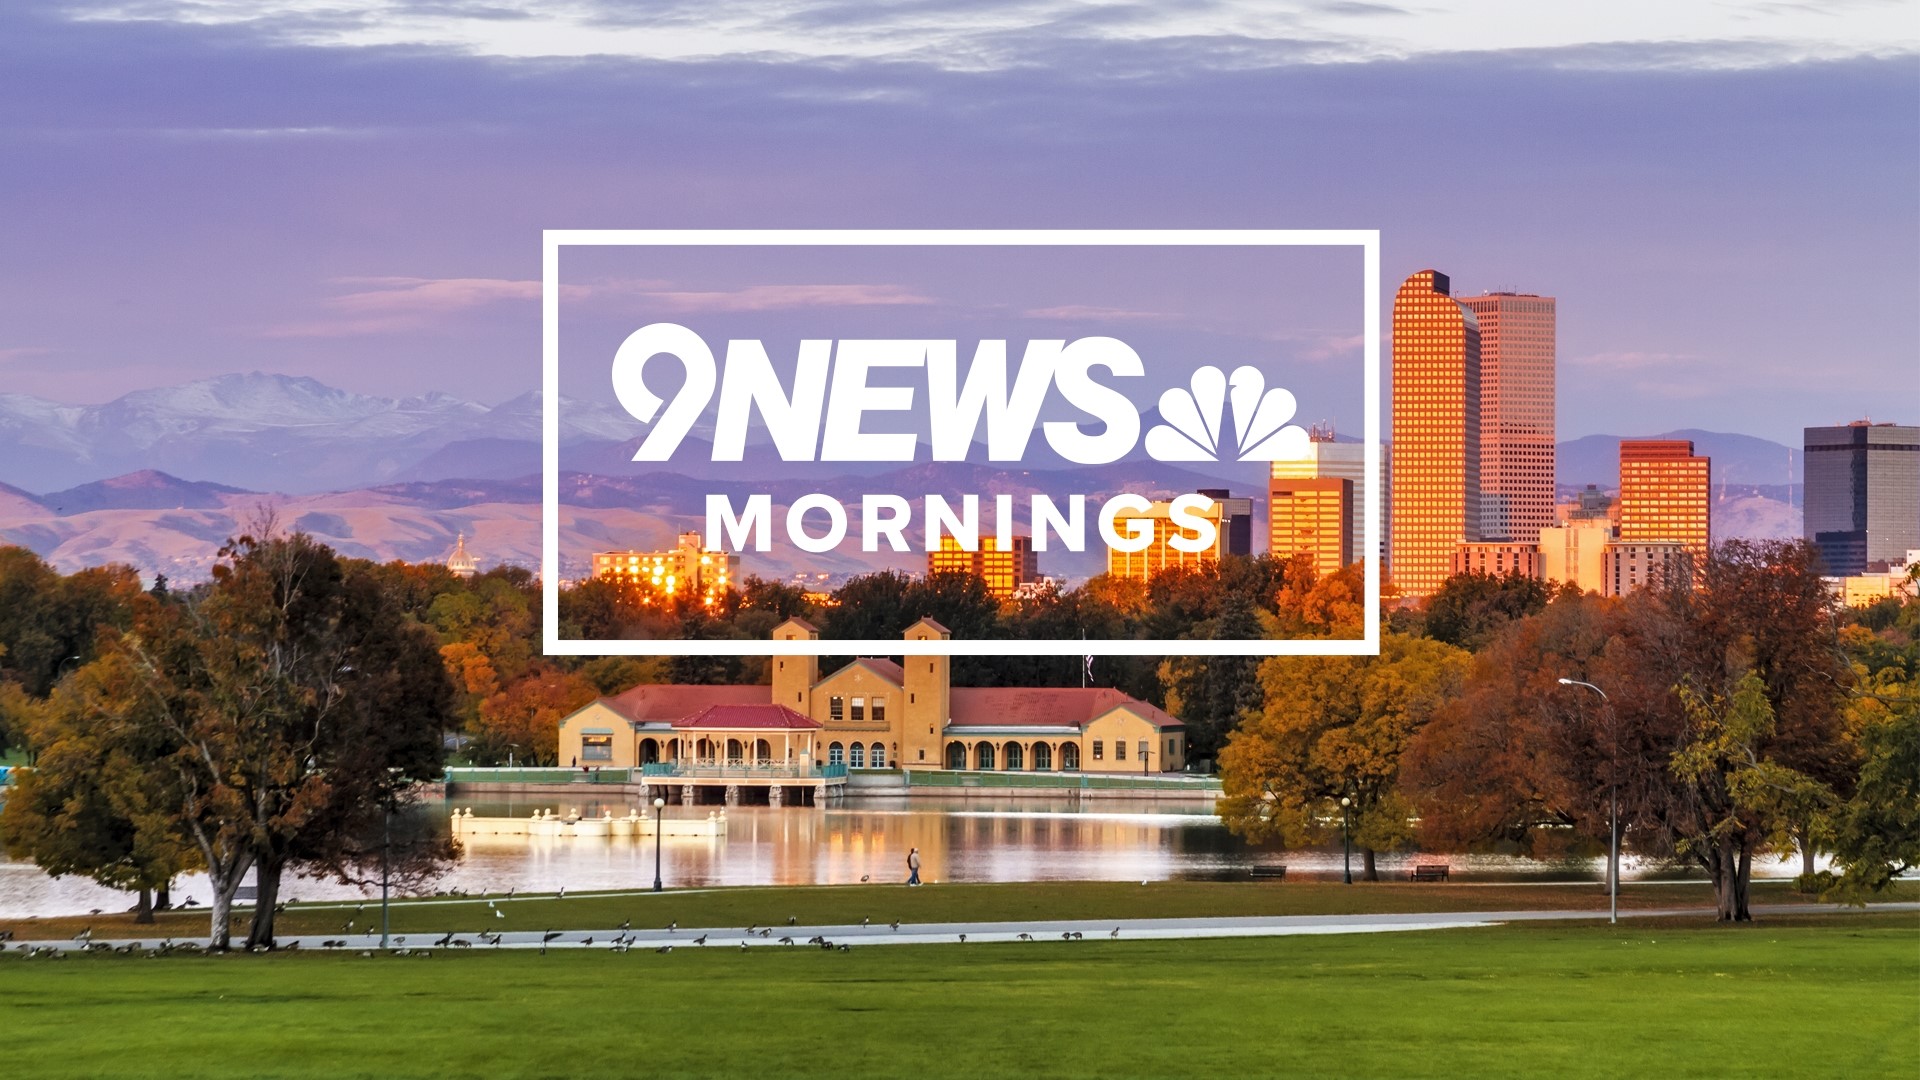 The 9NEWS team presents a morning newscast featuring local and national events, along with weather updates from around the Denver area.